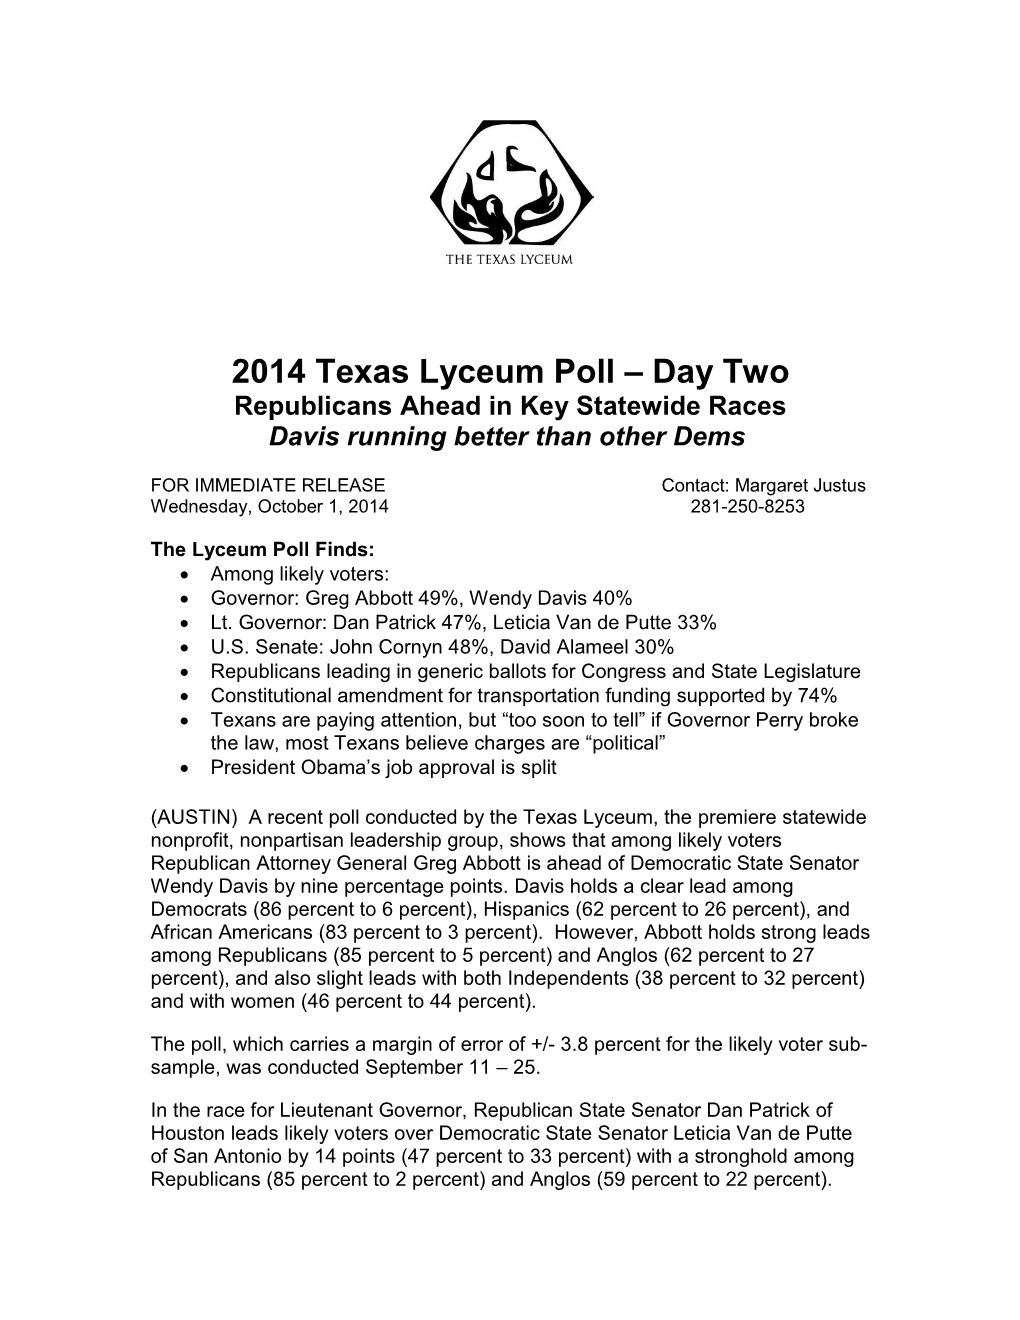 2014 Texas Lyceum Poll – Day Two Republicans Ahead in Key Statewide Races Davis Running Better Than Other Dems